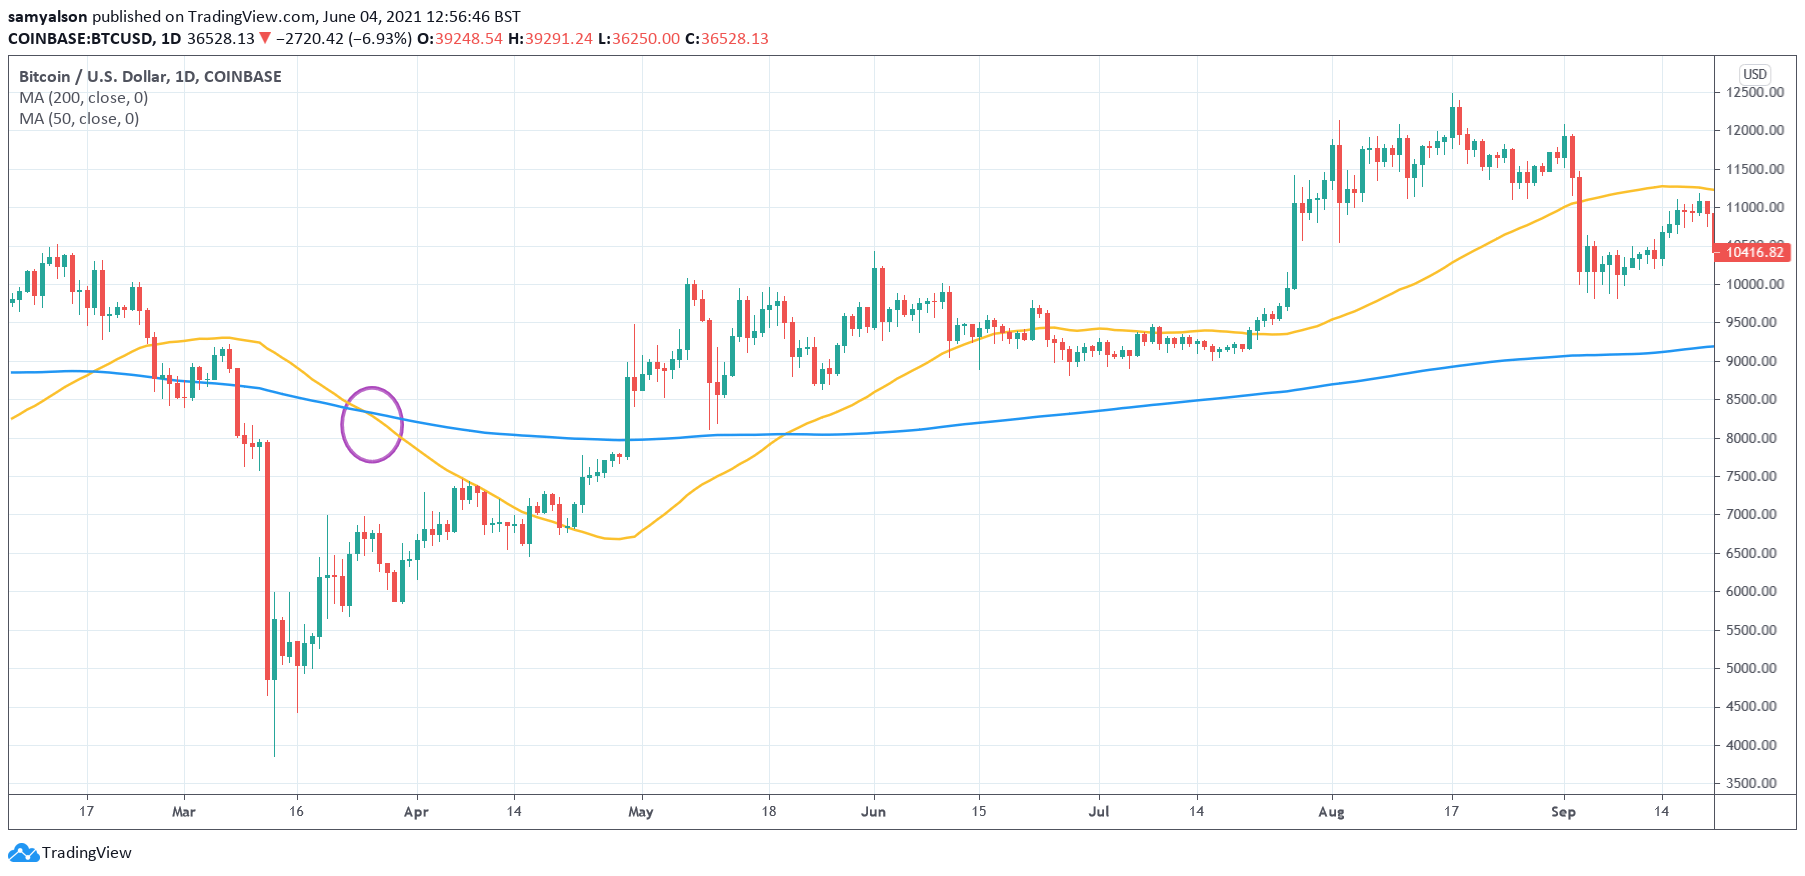 Bitcoin daily chart showing previous instance of a death cross in March 2020